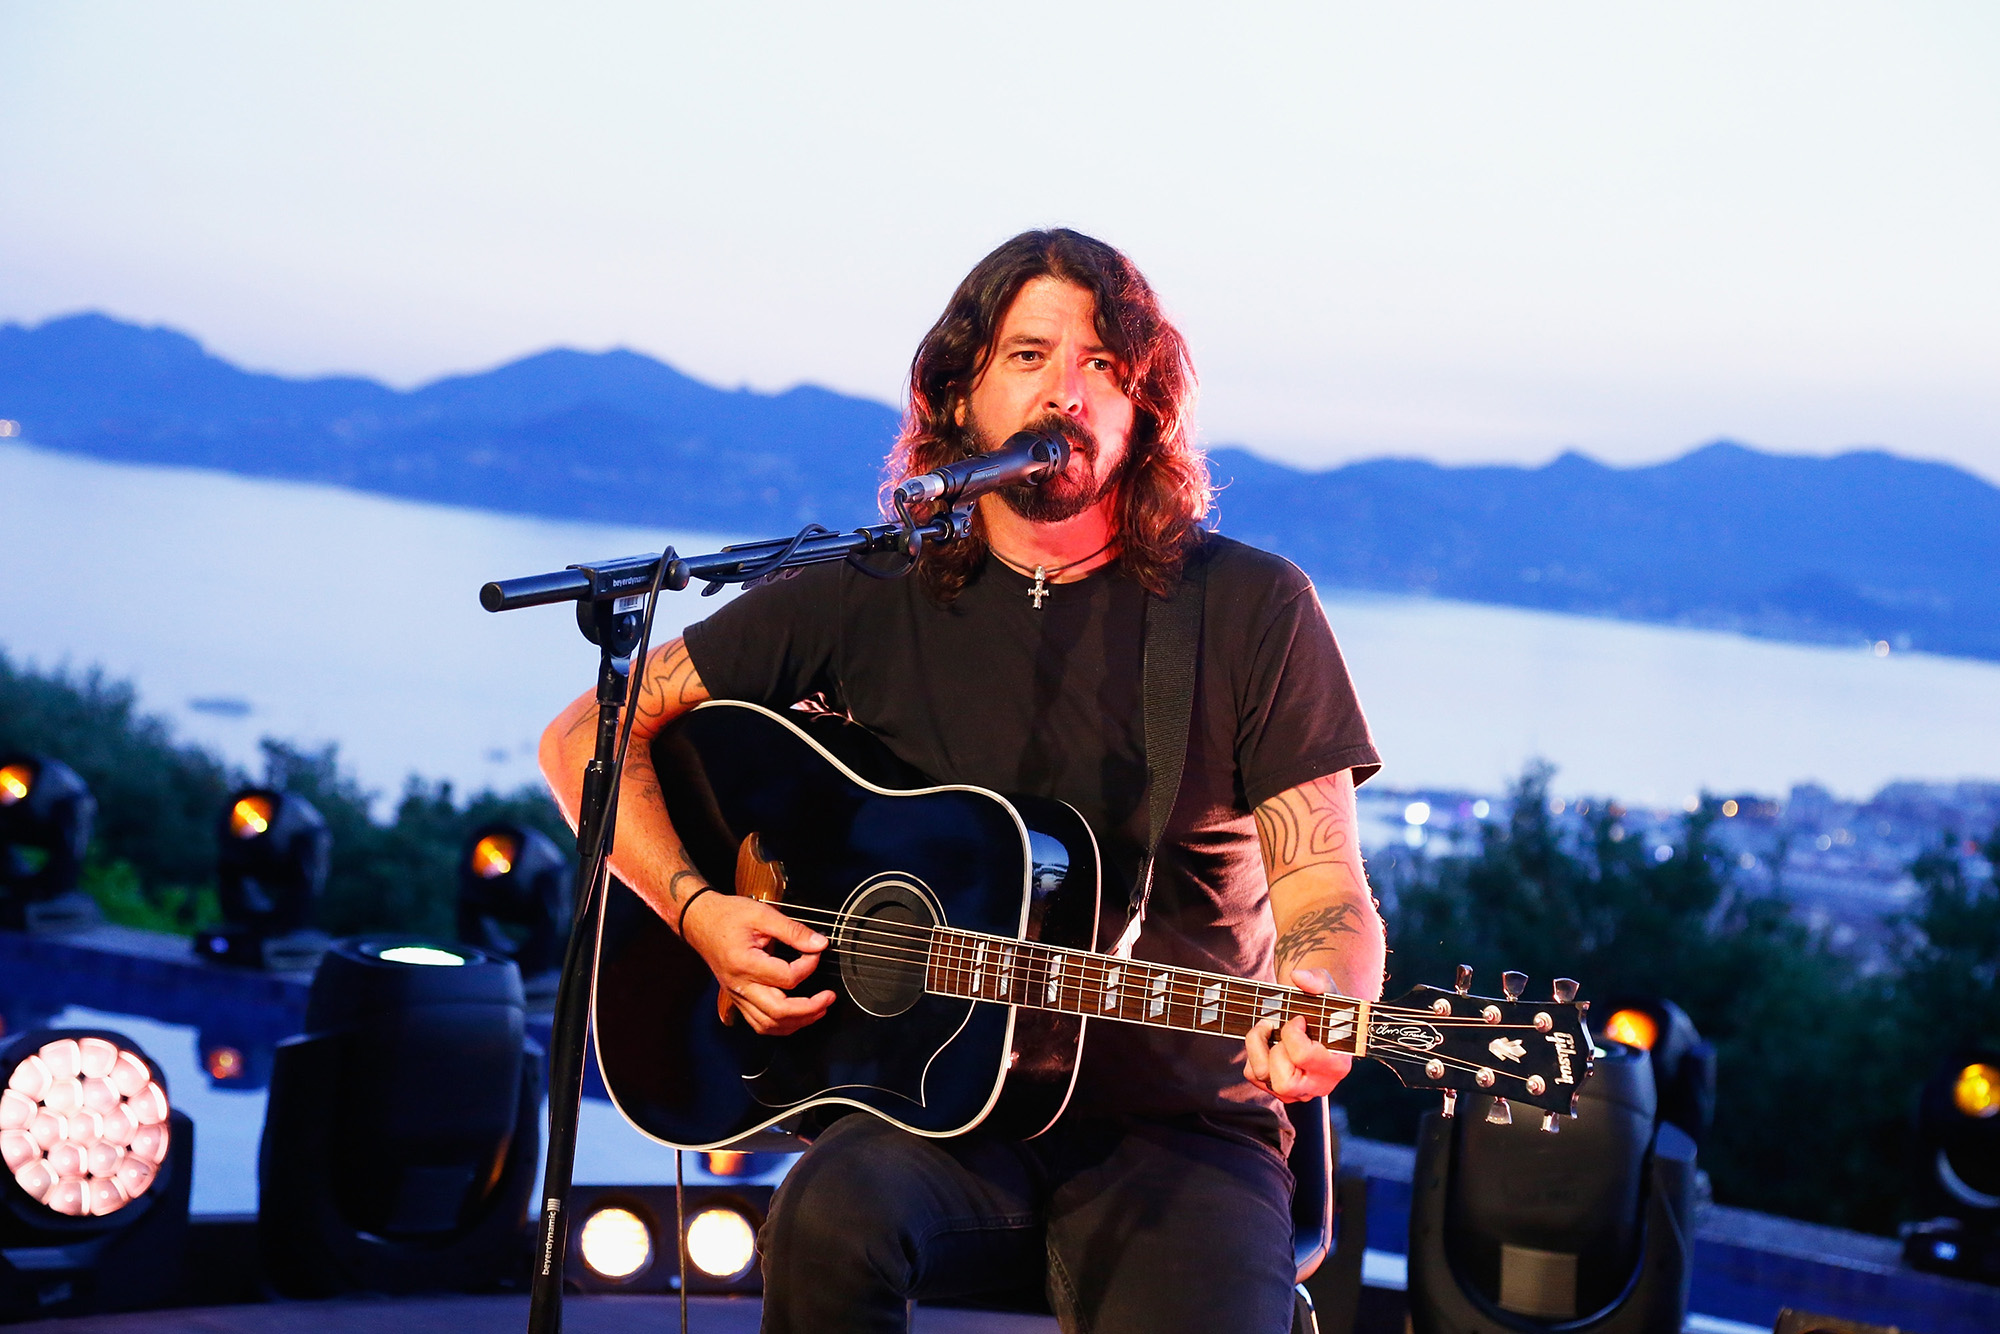 Singer Dave Grohl performs on stage during the Live Nation And Citi Special Evening At Cannes Lions on June 22, 2016 in Cannes, France.  (Photo by Julien M. Hekimian/Getty Images for Citi ) (Julien M. Hekimian—Citi/Getty Images)